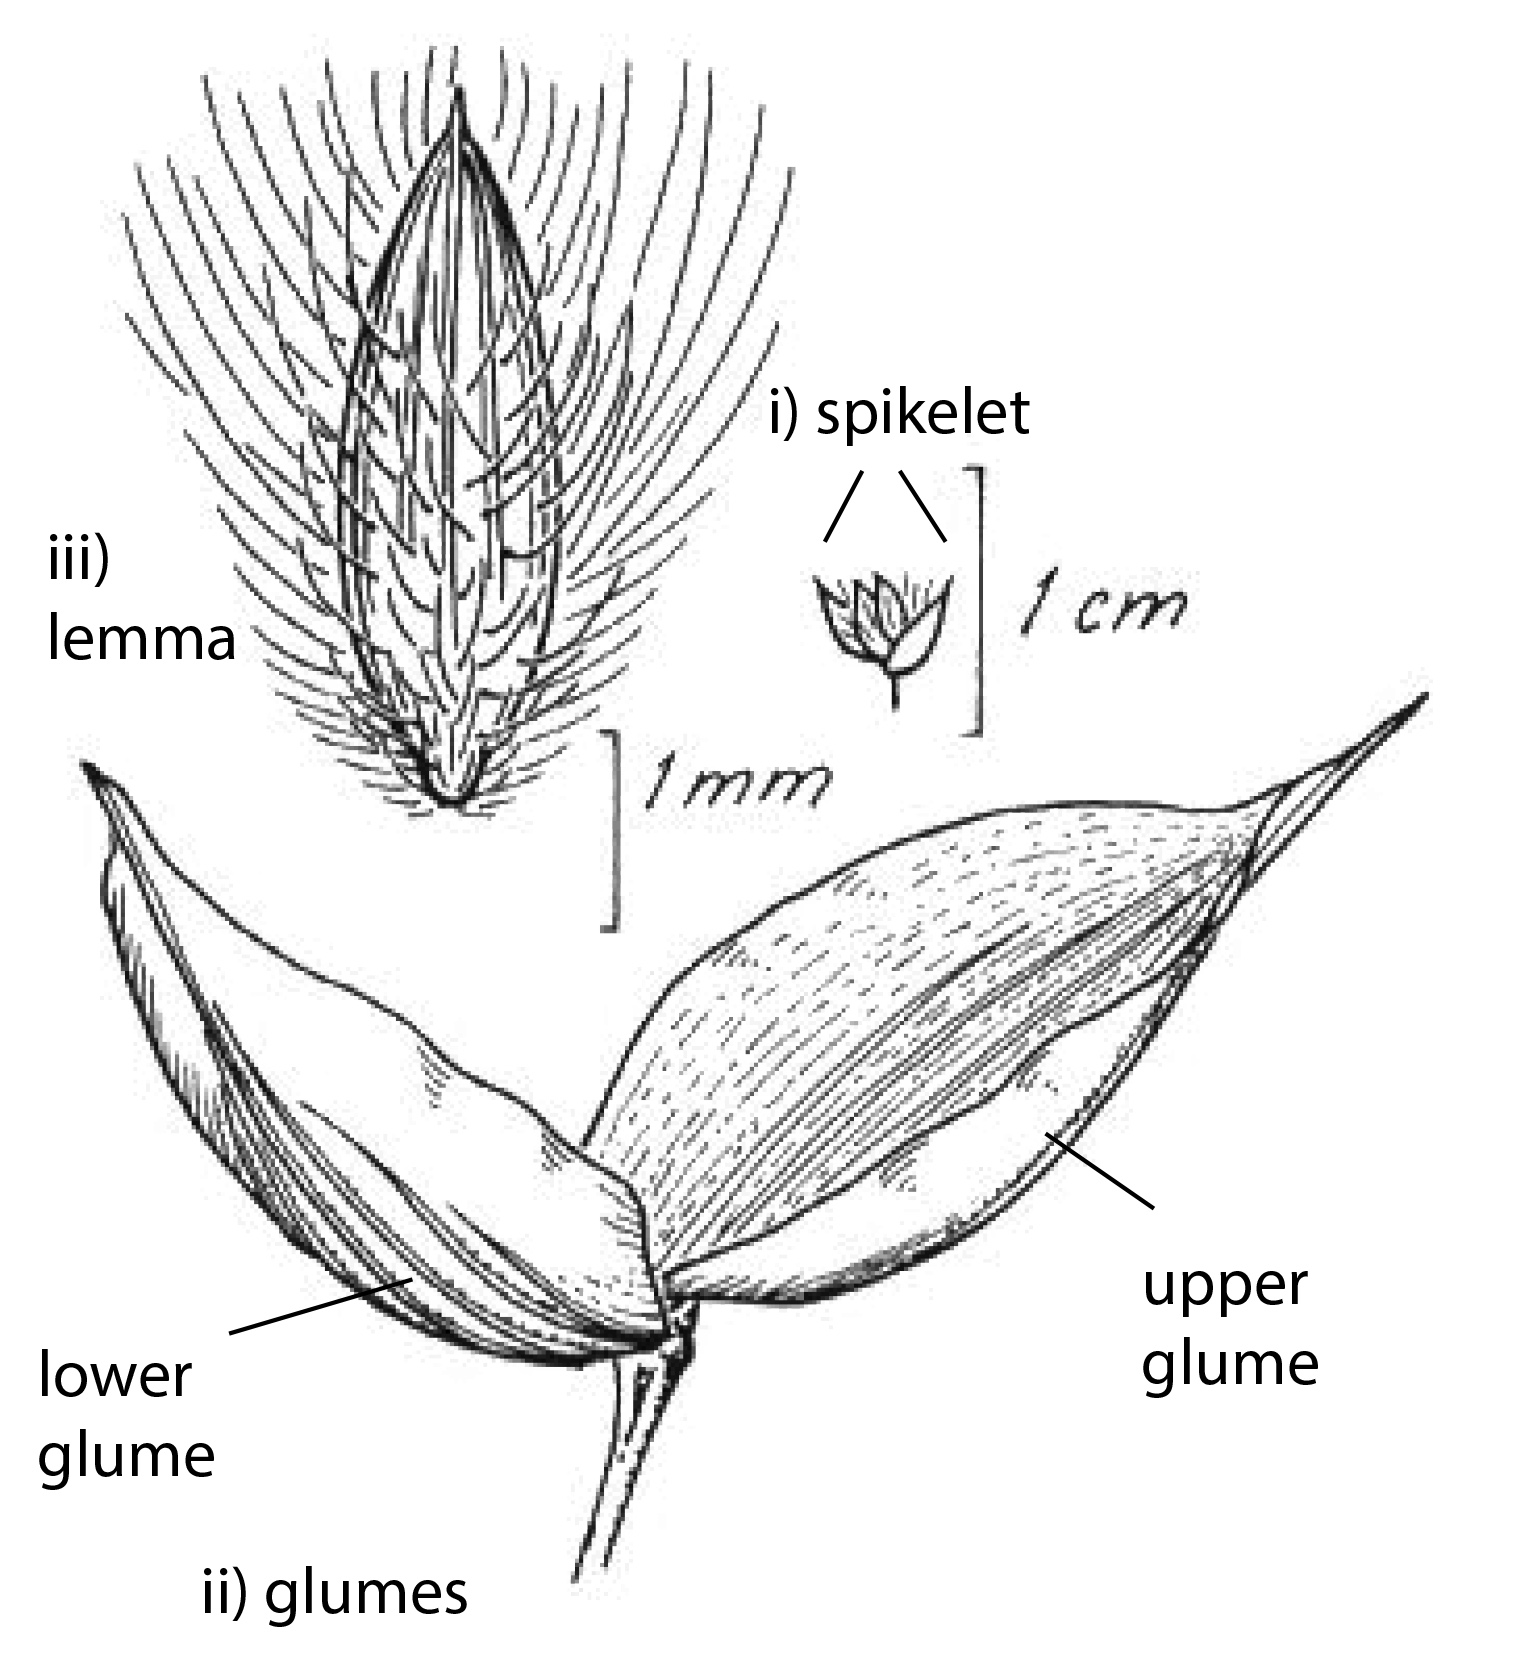 Fig. 4. Line drawing of Eriachne obtusa spikelets showing i) whole spikelet, ii) arrangement of upper and lower glumes, and iii) hairy lemma. Reproduced with permission from Cowie et al (2000). (CC By: Monika Osterkamp Madsen).